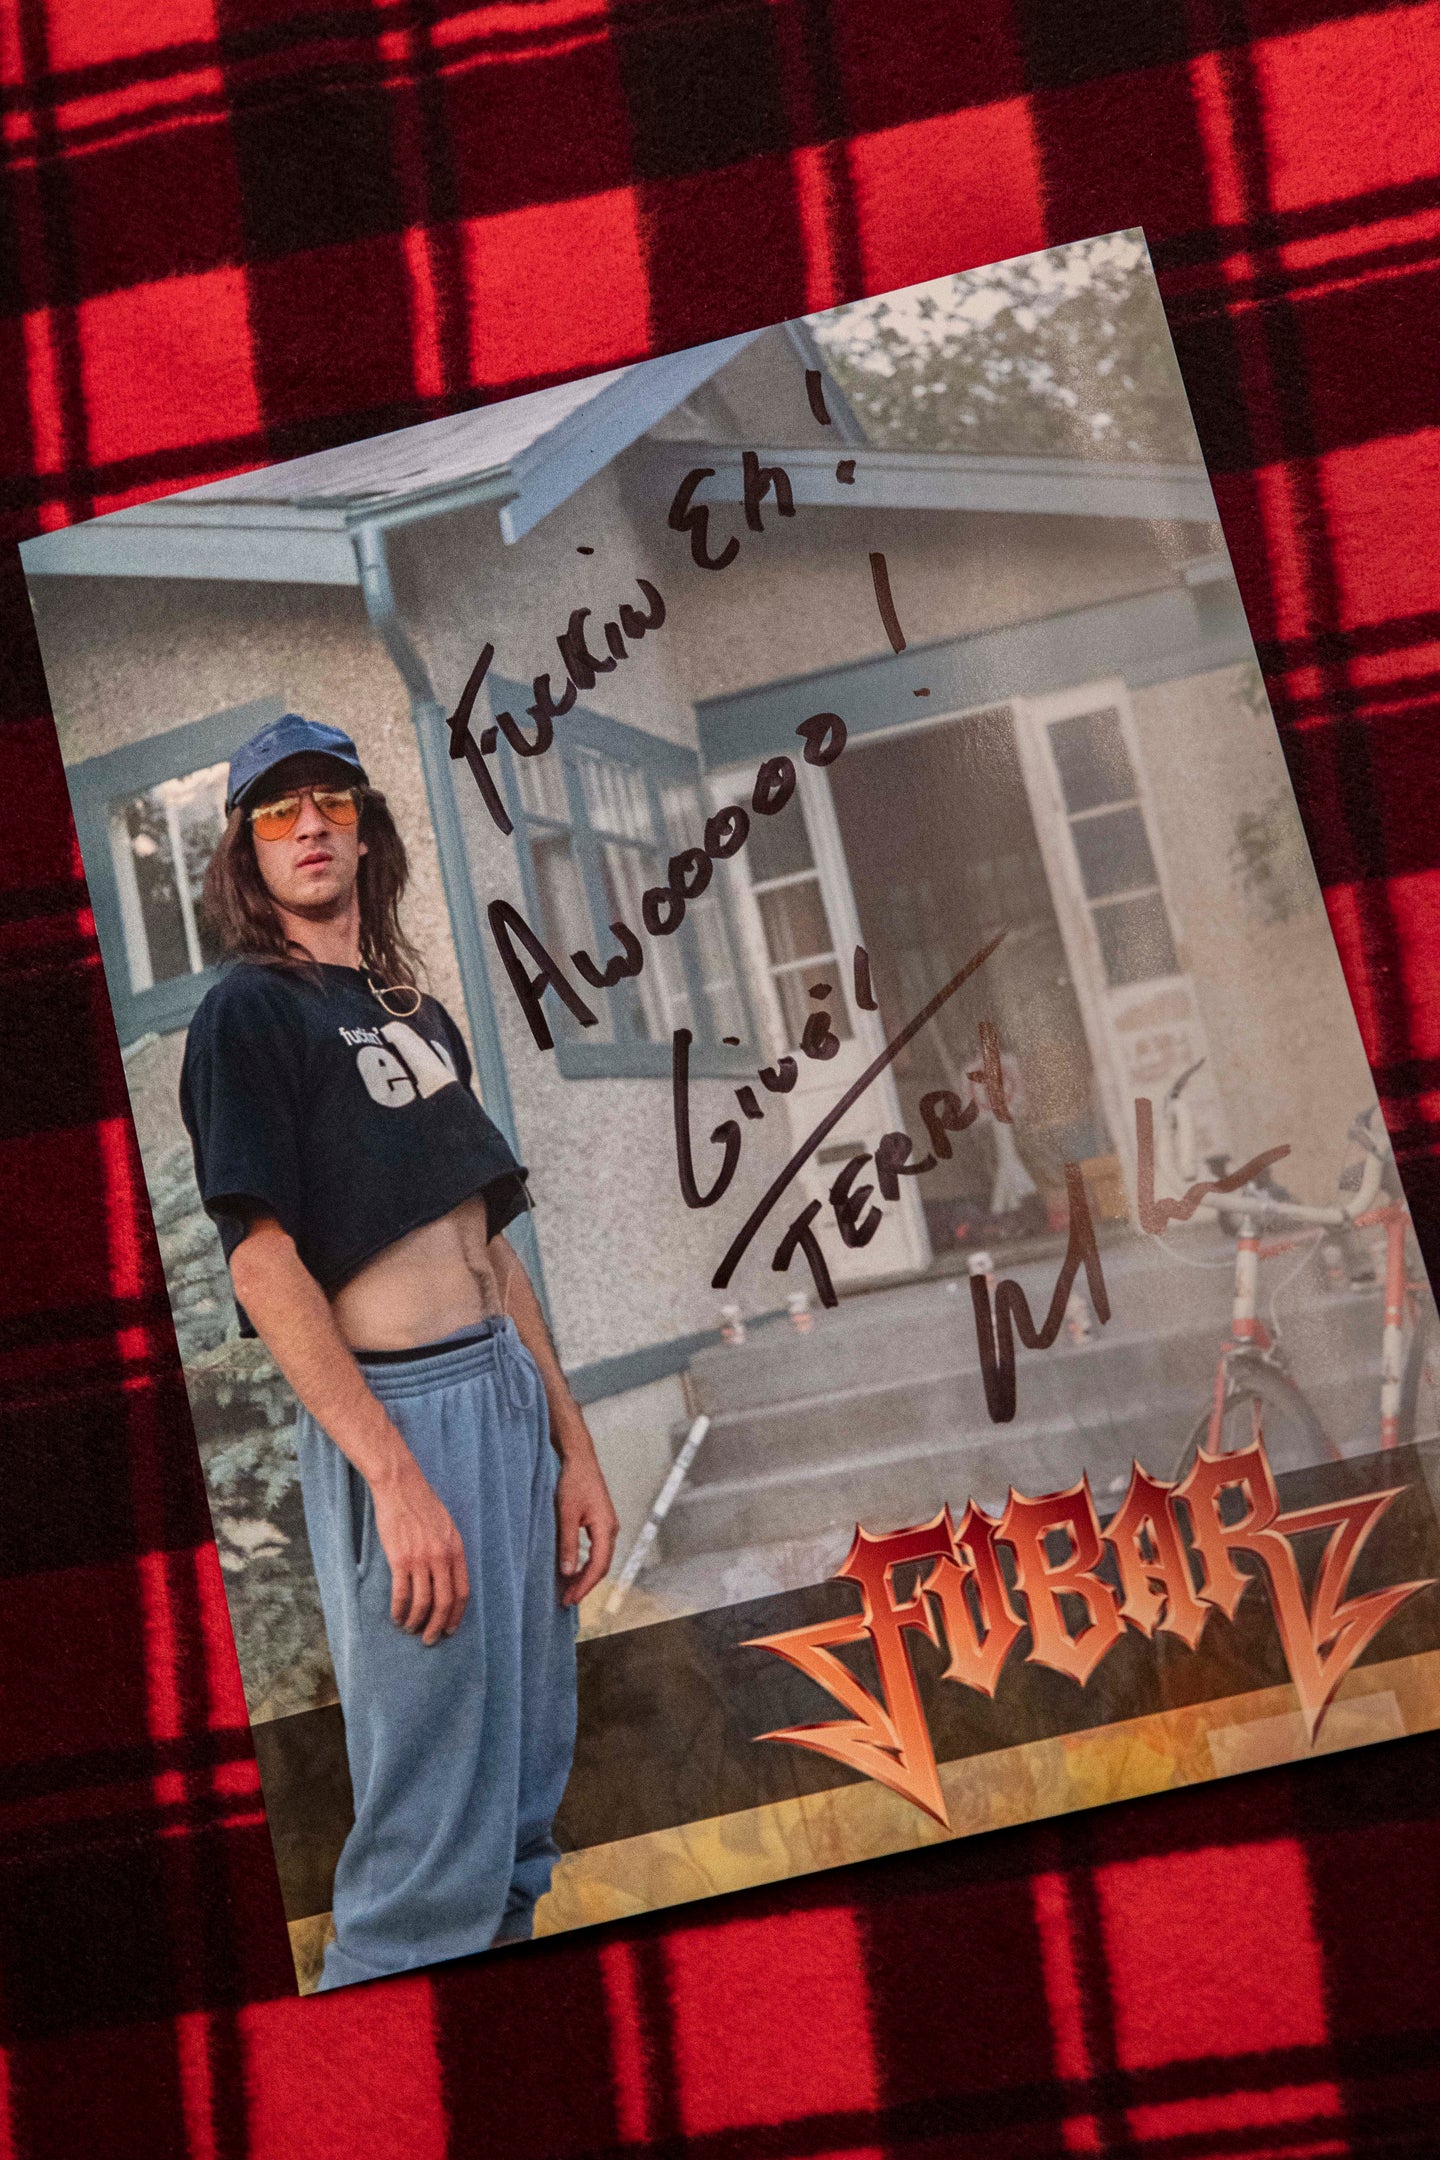 SIGNED PHOTO by Terry - 8 by 10